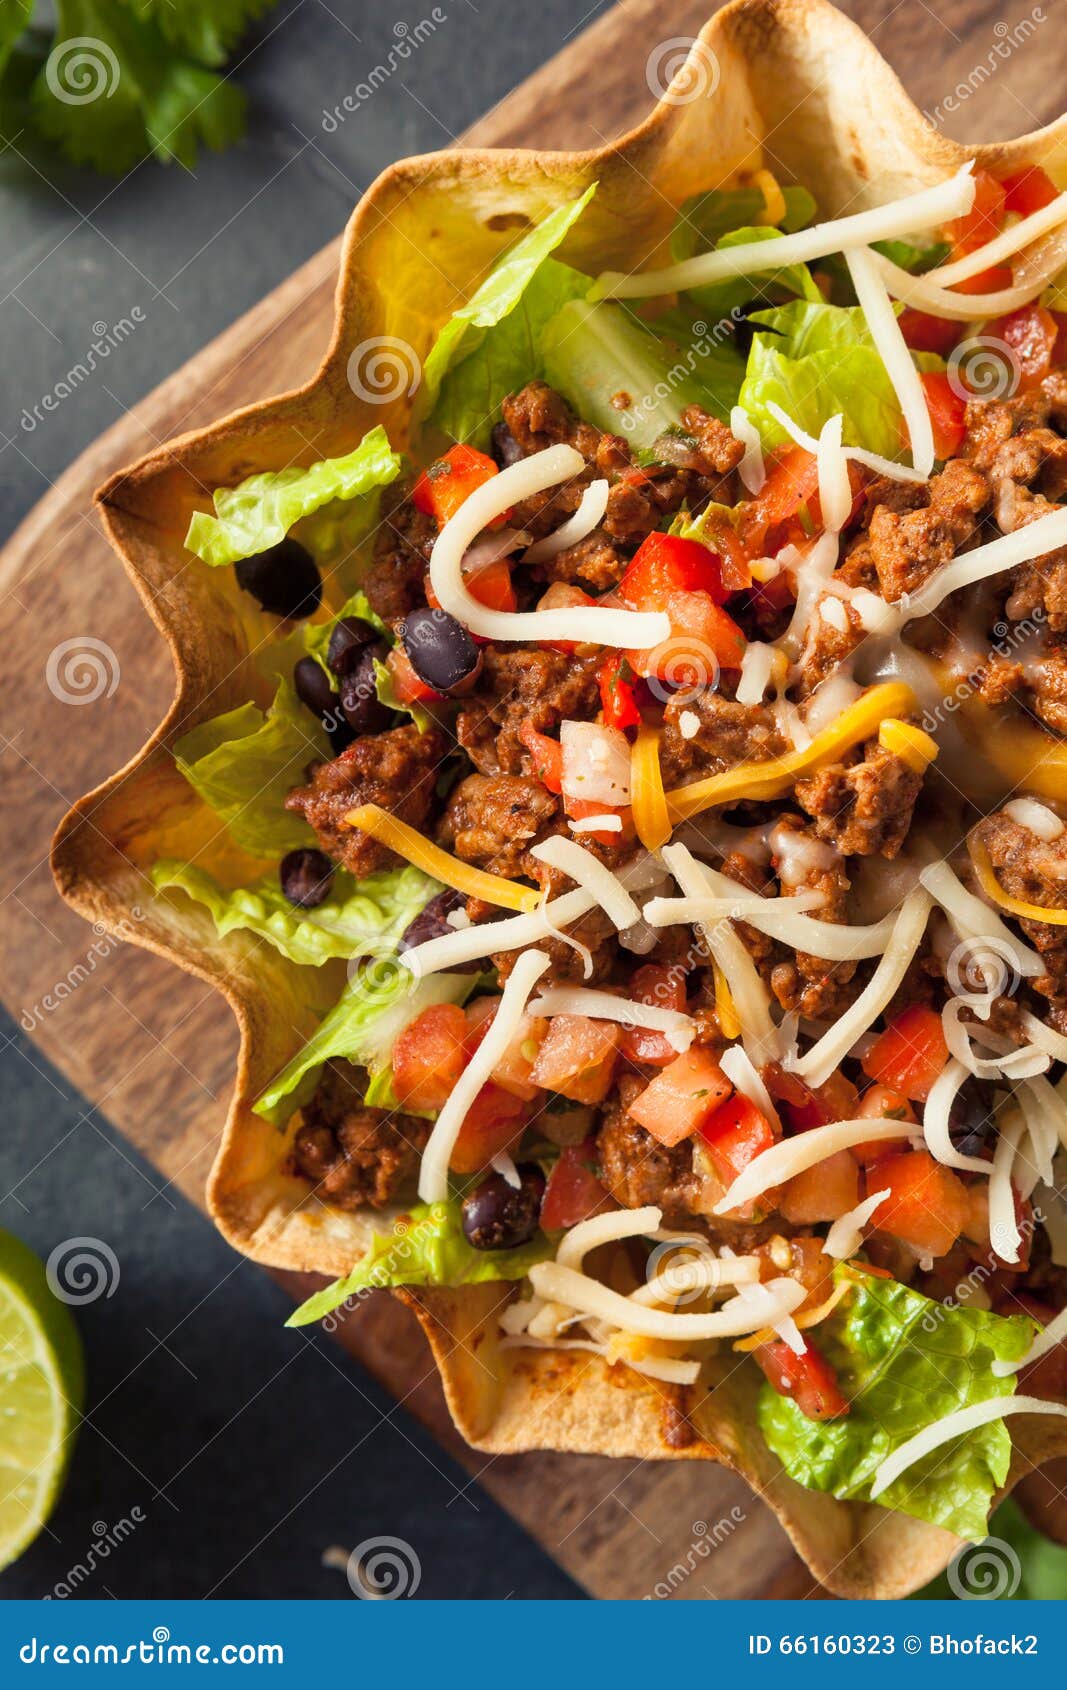 Taco Salad in a Tortilla Bowl Stock Image - Image of ingredients ...